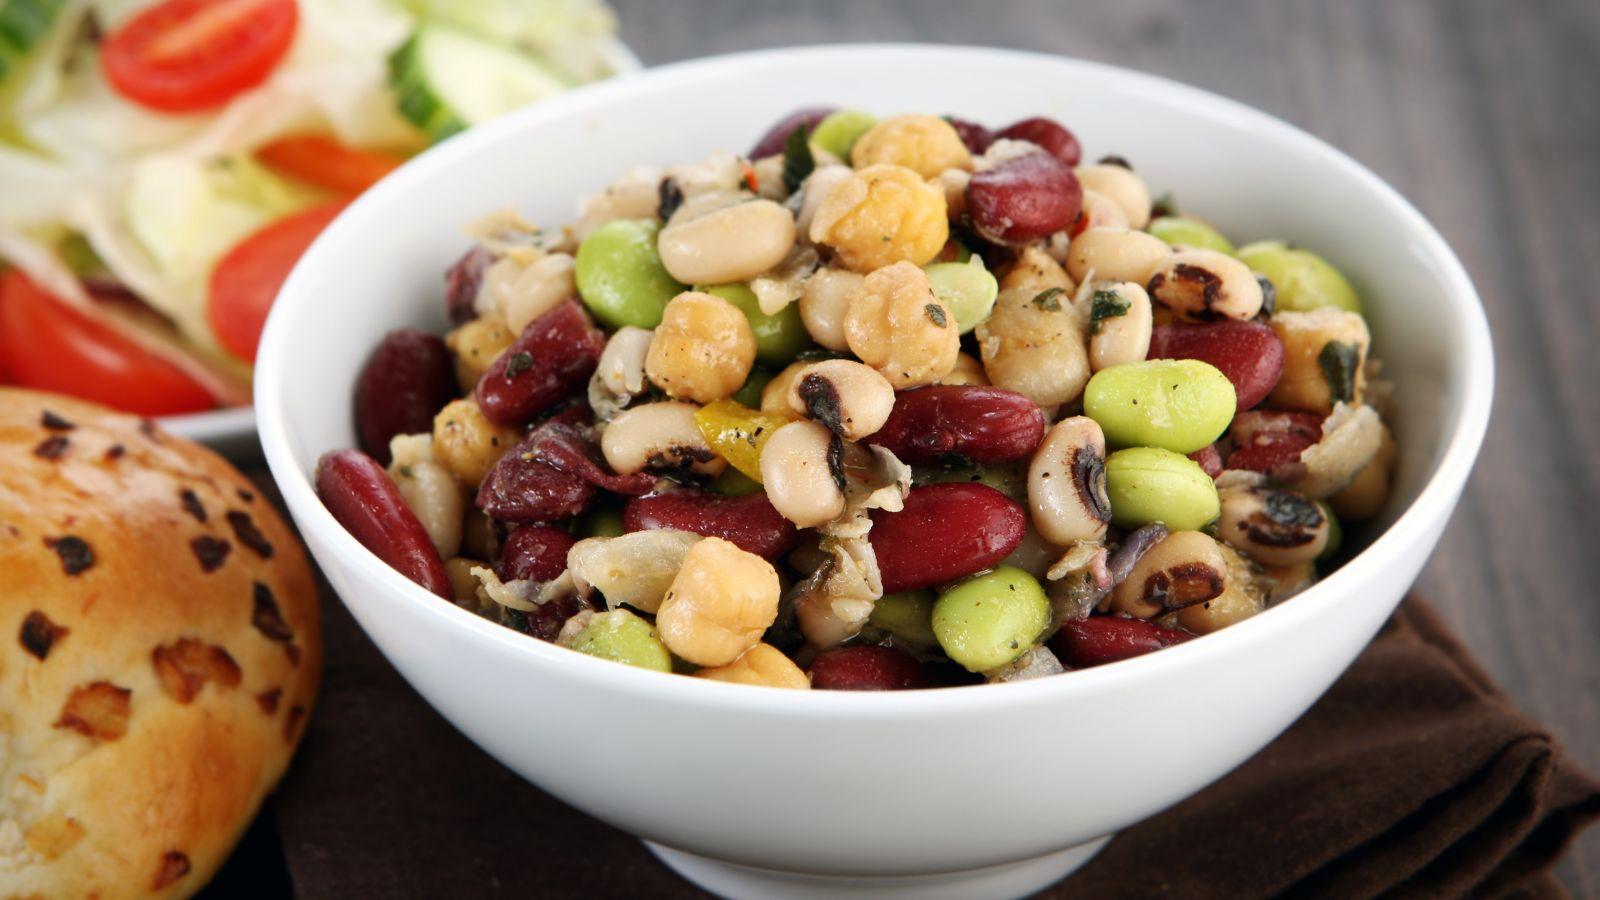 A bean salad with black eyed peas, edamame, kidney and garbanzo beans.